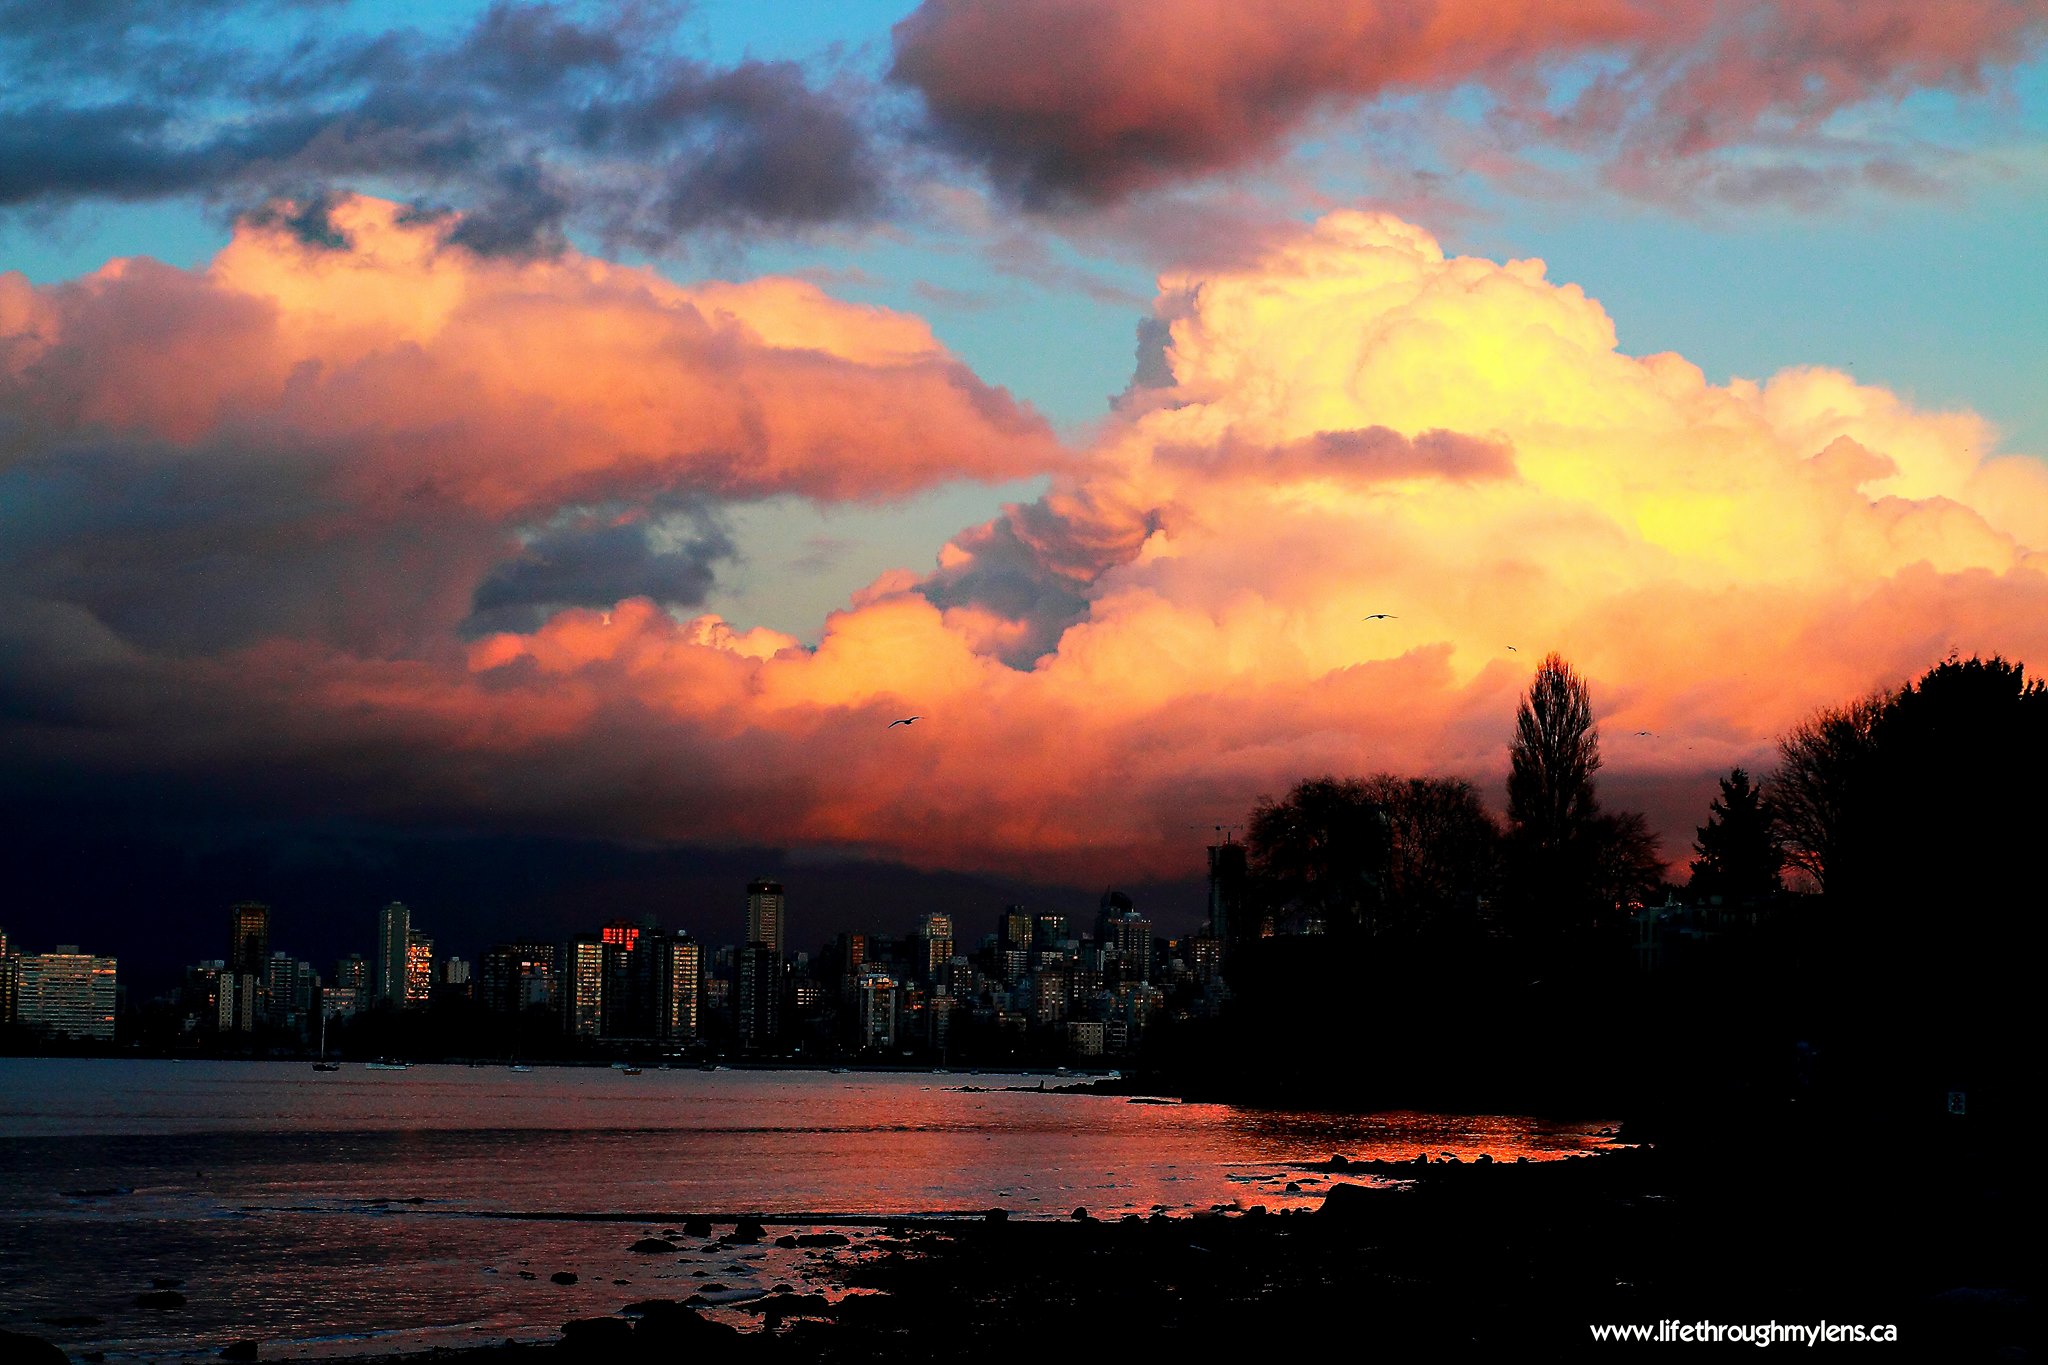 Vancouver, Britich Columbia, Jason Kenzie, photographer, photography, The Photo Warrior, sunset
www.lifethroughmylens.ca